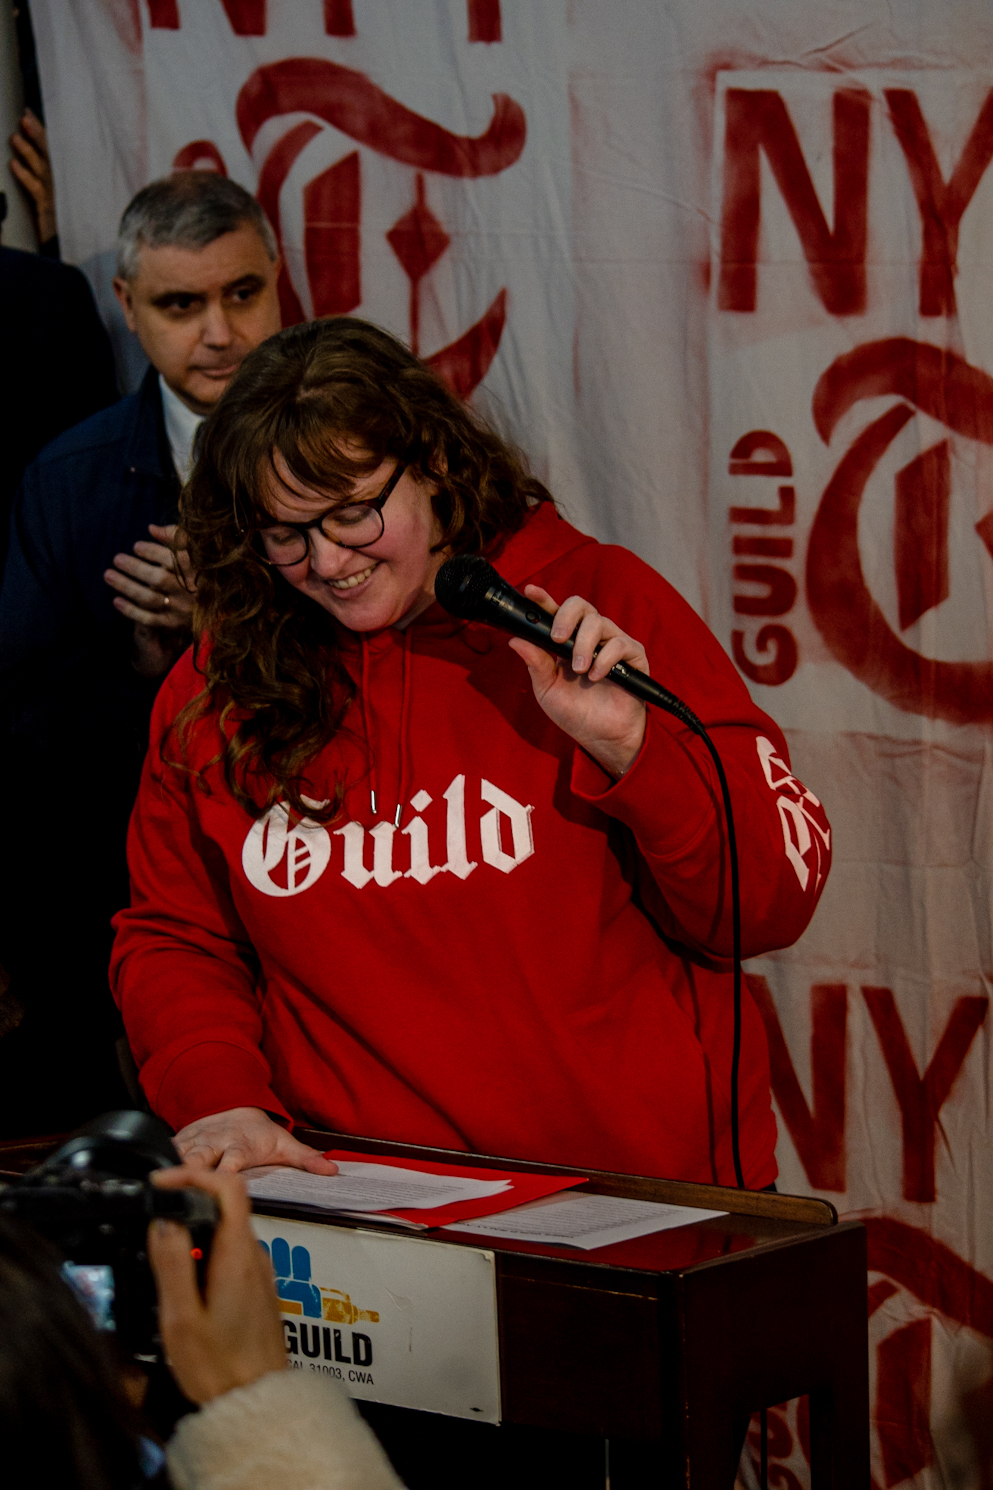 Carrie Price, a woman with short brown hair, standing at the podium wearing a red hoodie with “Guild” written on it.